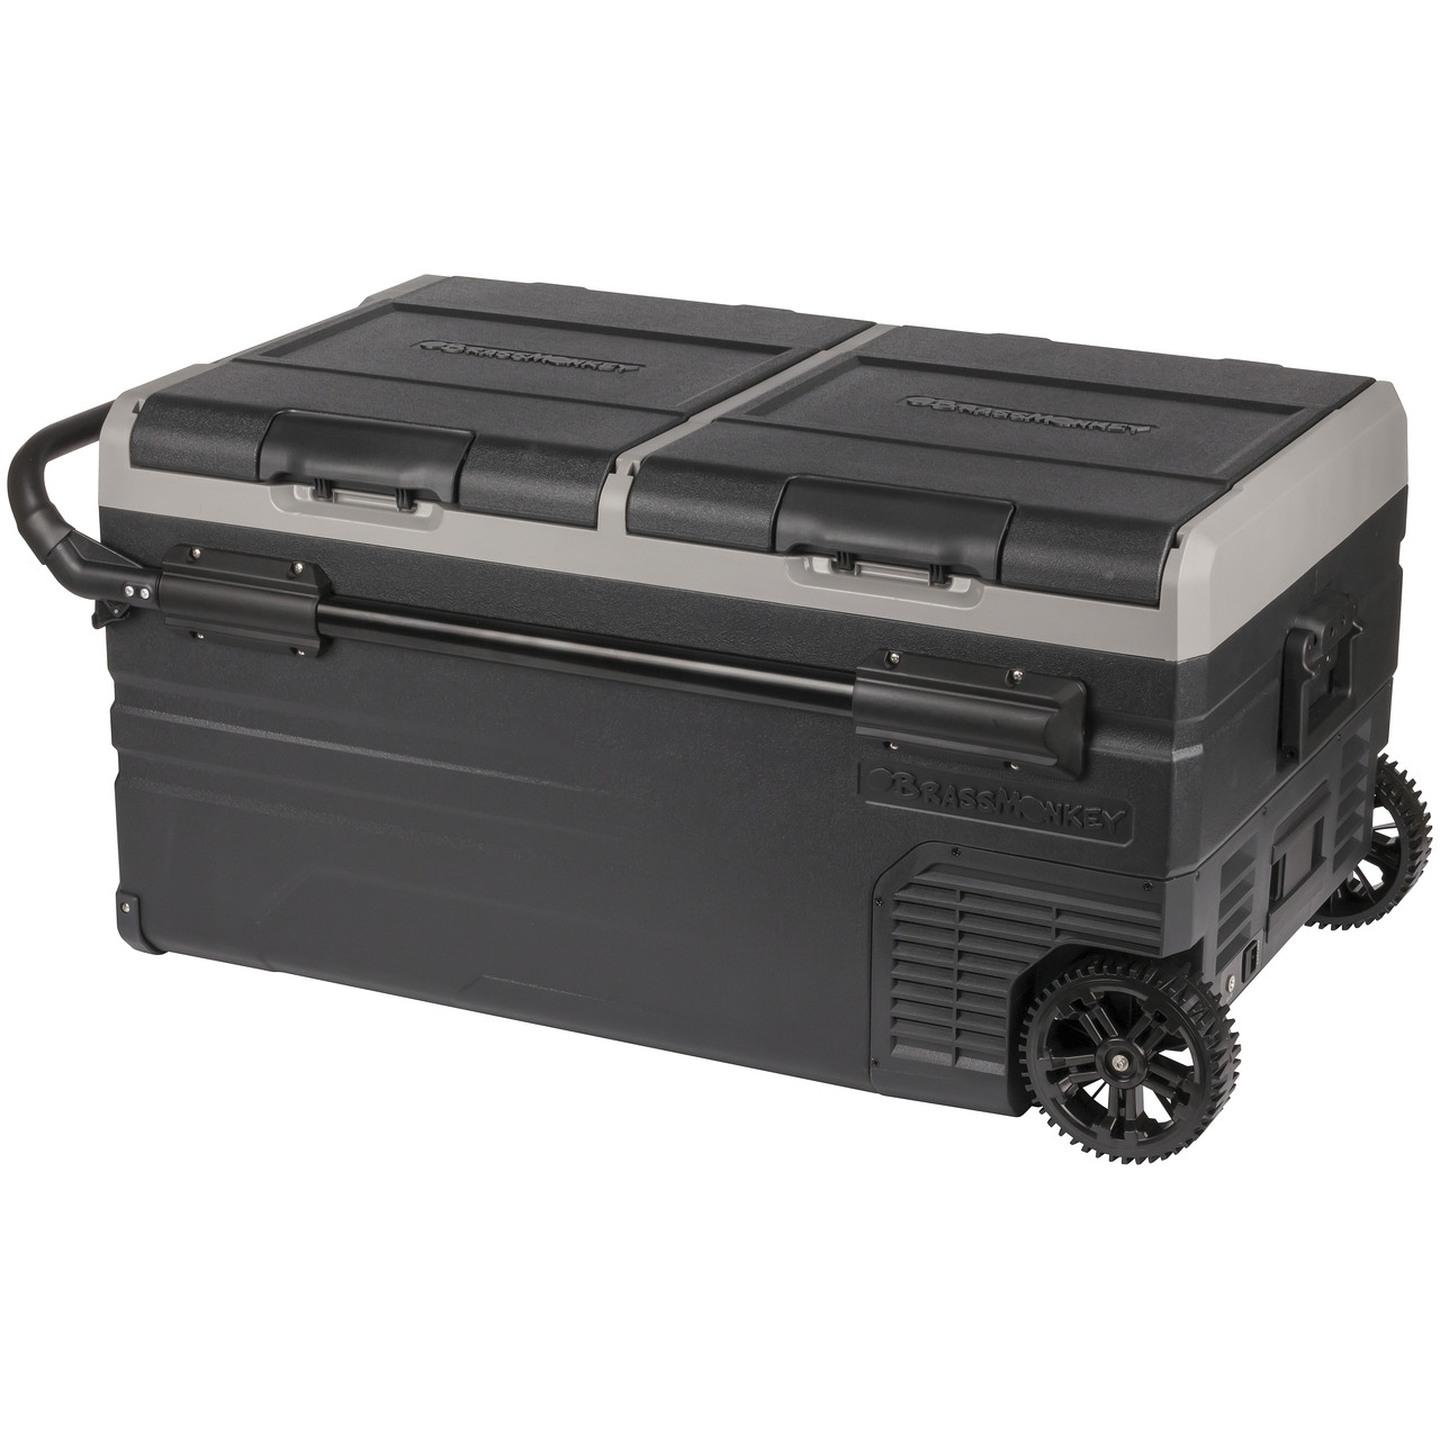 95L Brass Monkey Portable Low Profile Dual Zone Fridge/Freezer with Wheels and Battery Compartment